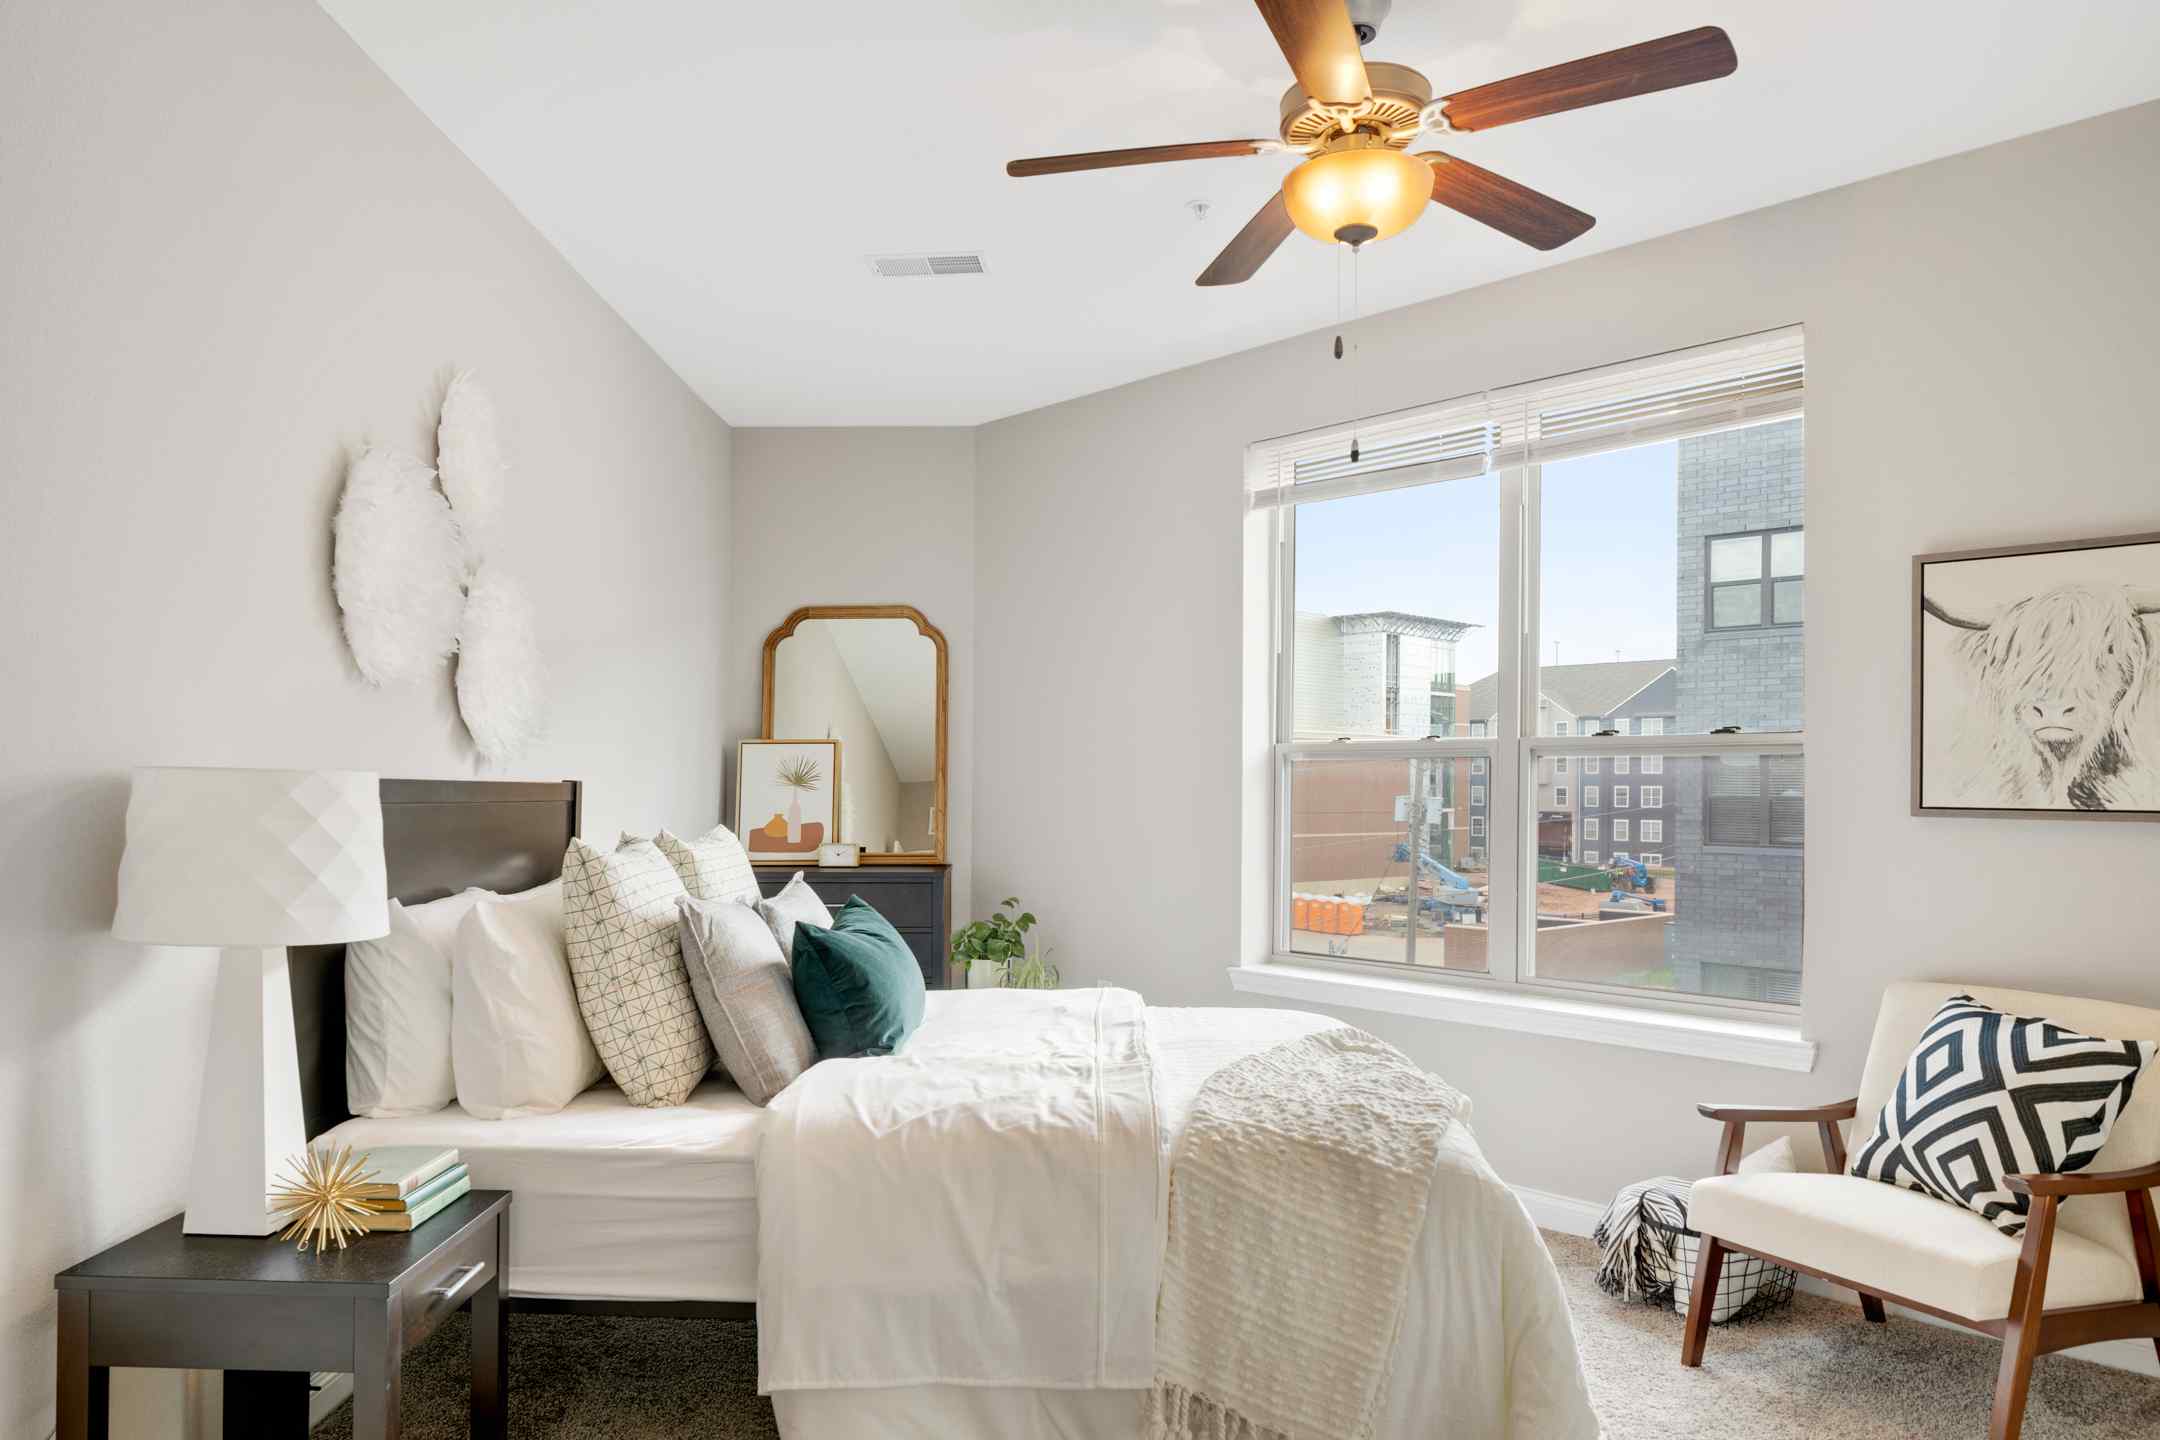 A cozy student housing bedroom with a ceiling fan and a neatly made bed. Perfect for studying and relaxing.